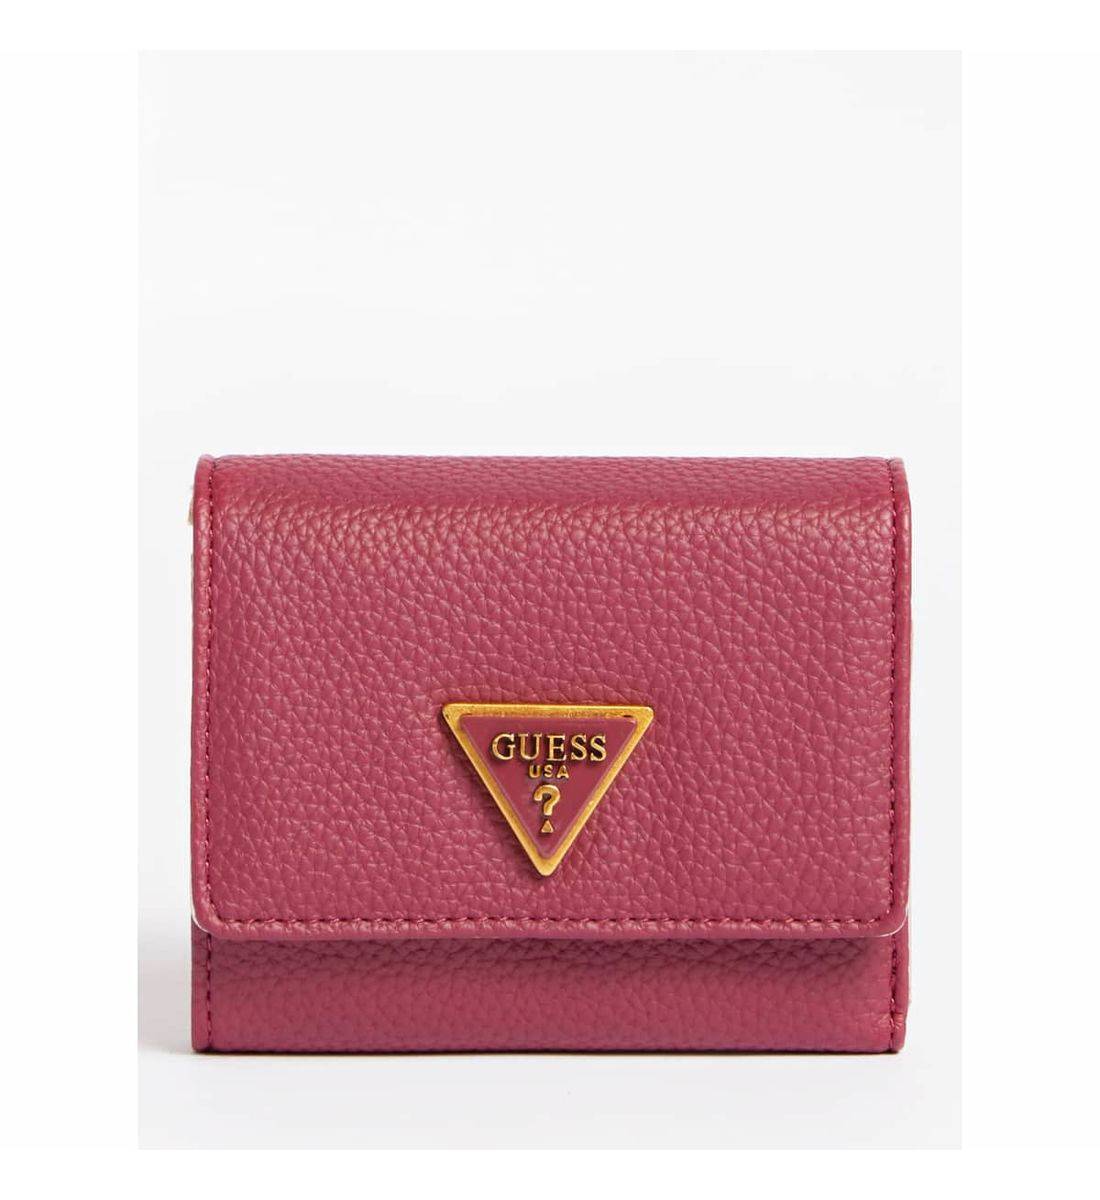 GUESS Porte-monnaie Downtown Chic Rose - All In Bag